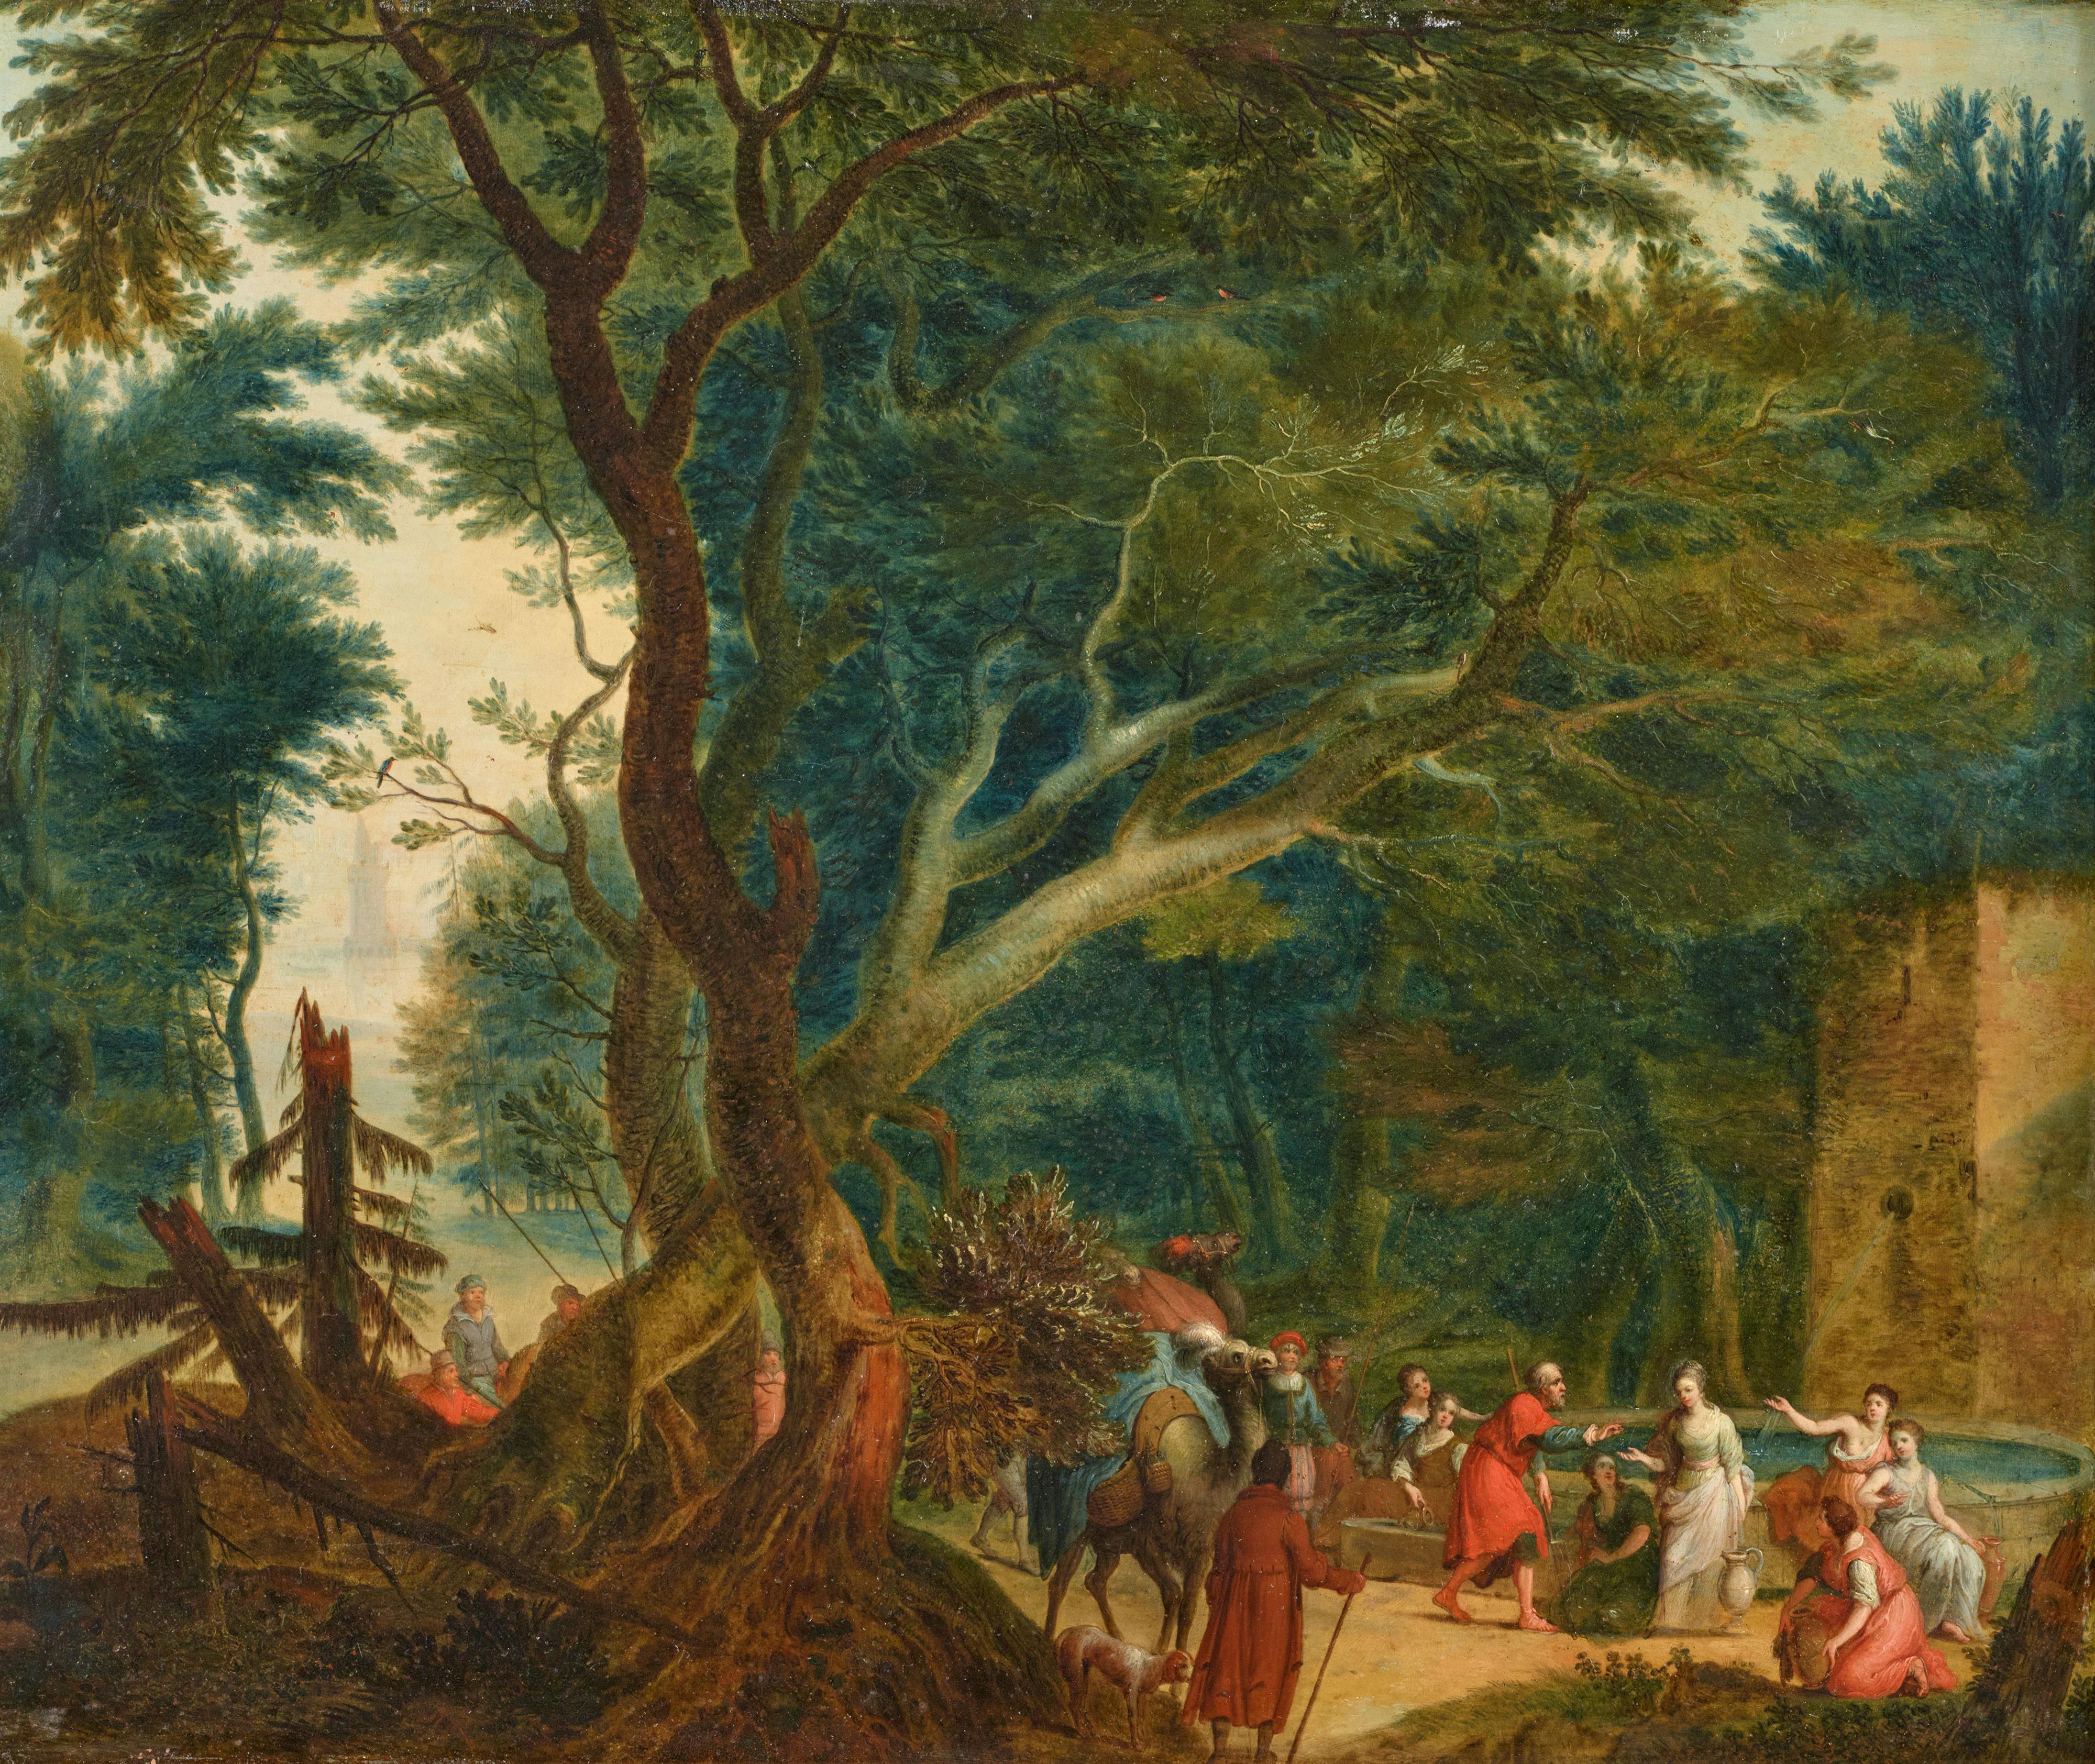 Adriaen van Stalbemt - Rebecca and Eliezer at the fountain in a wooded landscape - image-1